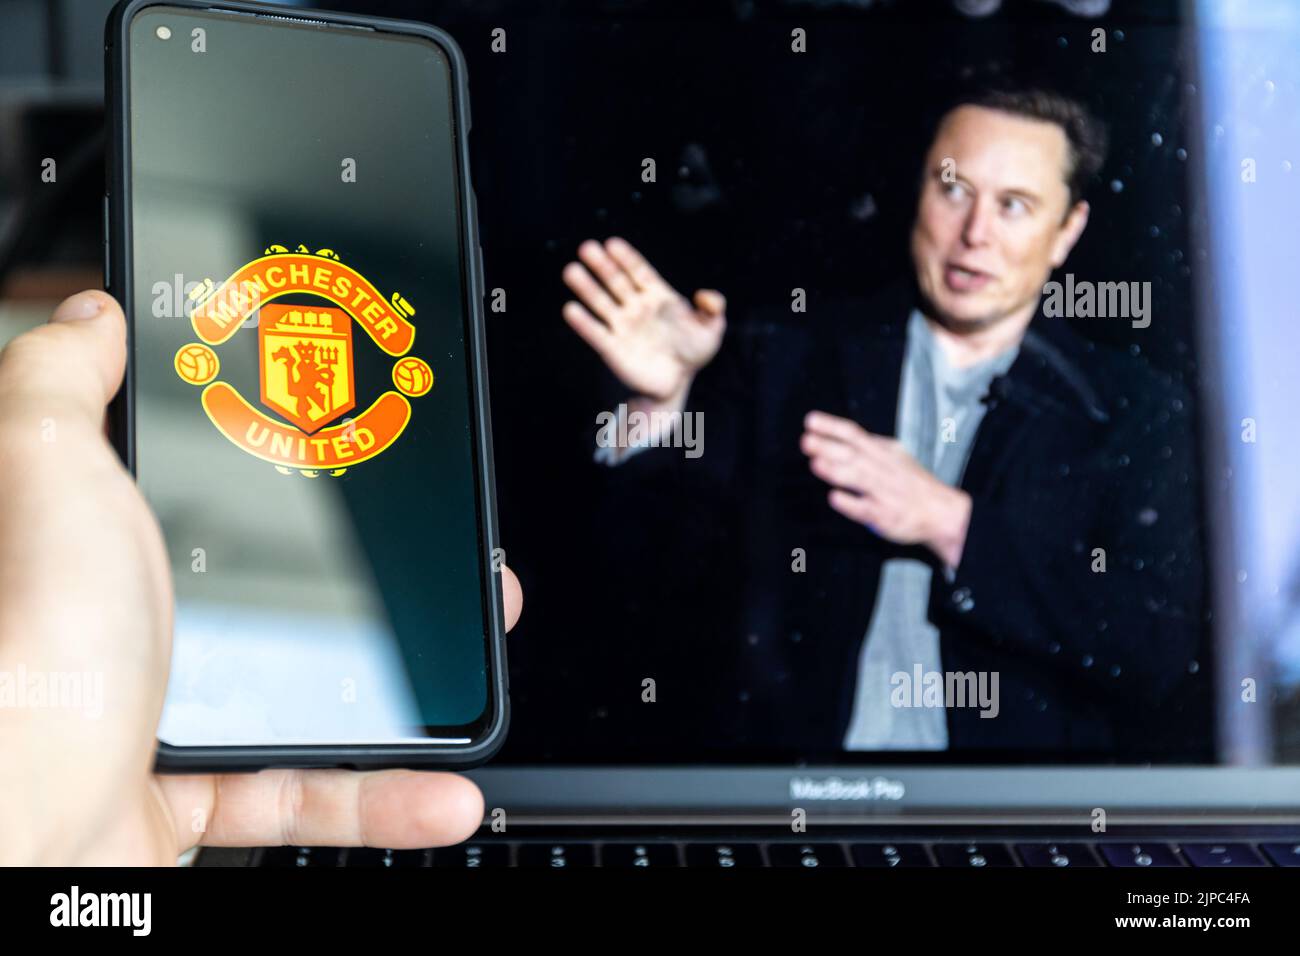 Manchester , United Kingdom - August 17, 2022: Manchester United football club and Elon Musk in background Stock Photo